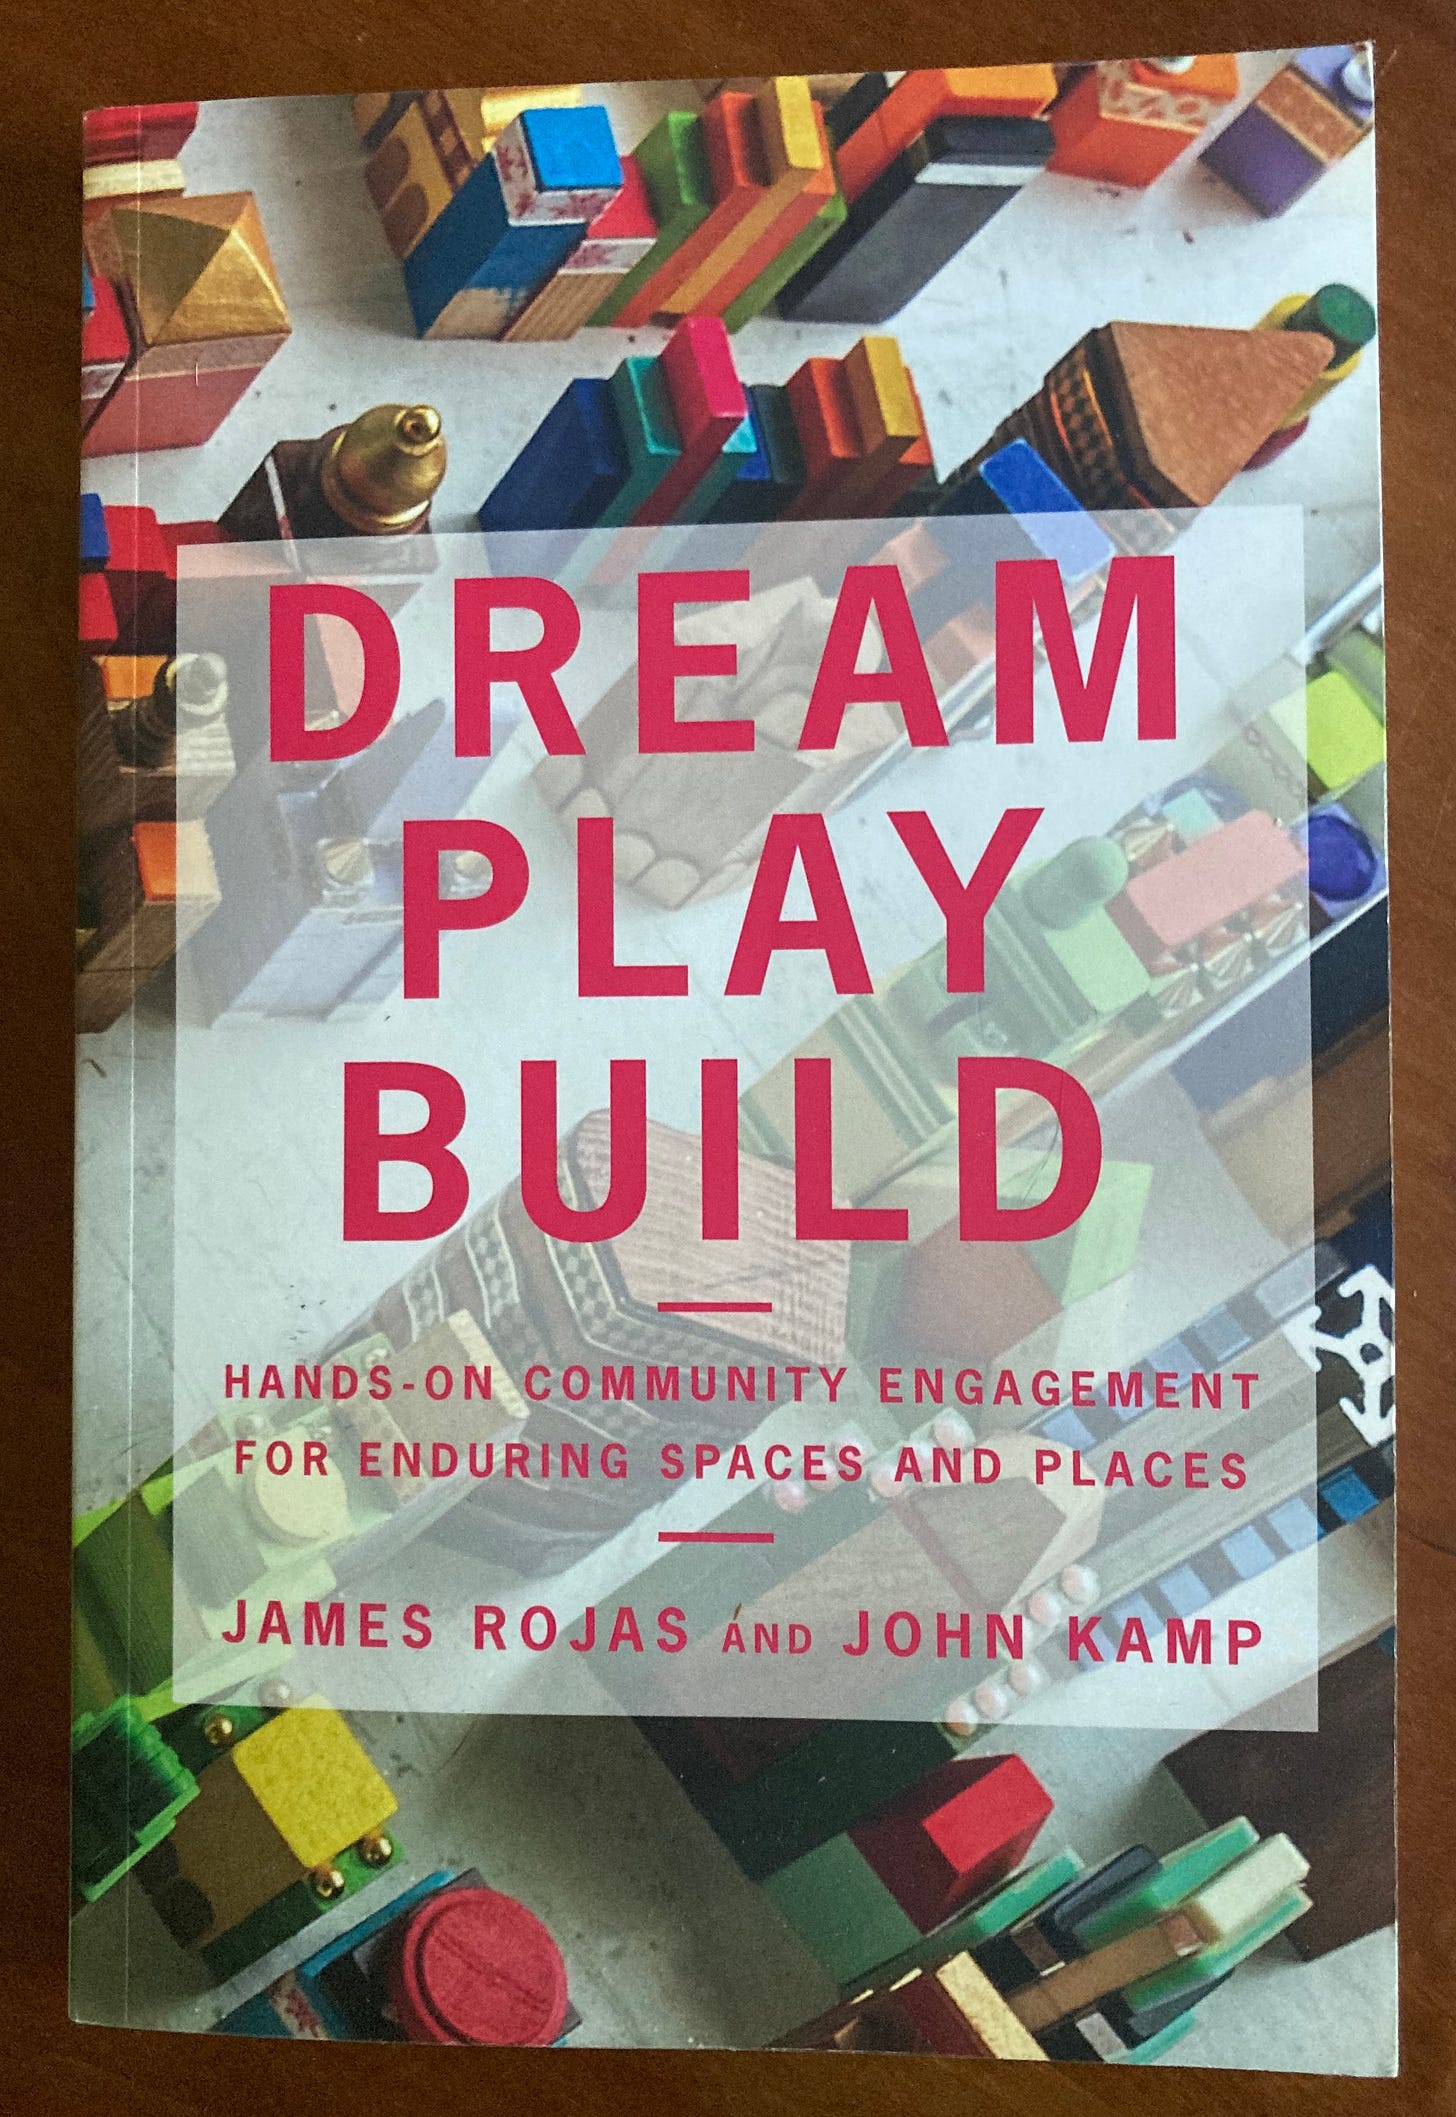 Photograph of the cover of the book Dream, Play, Build